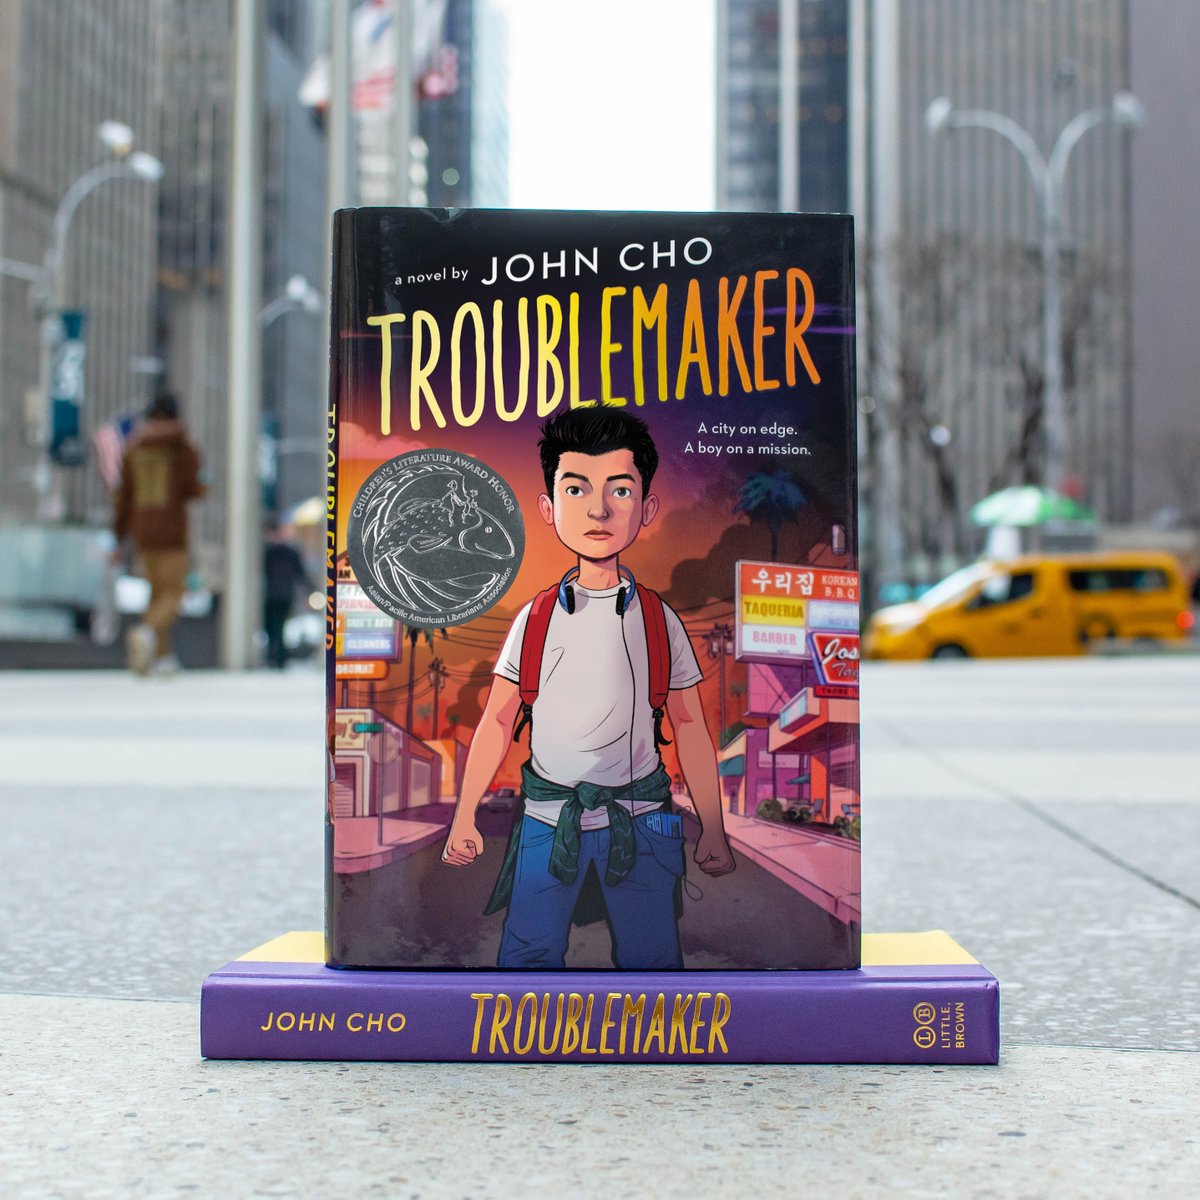 Have you read @JohnTheCho's bestselling TROUBLEMAKER? This Asian/Pacific American Award for Literature Honor Book is unputdownable! (Seriously though, I read it in one heart-pounding sitting.)